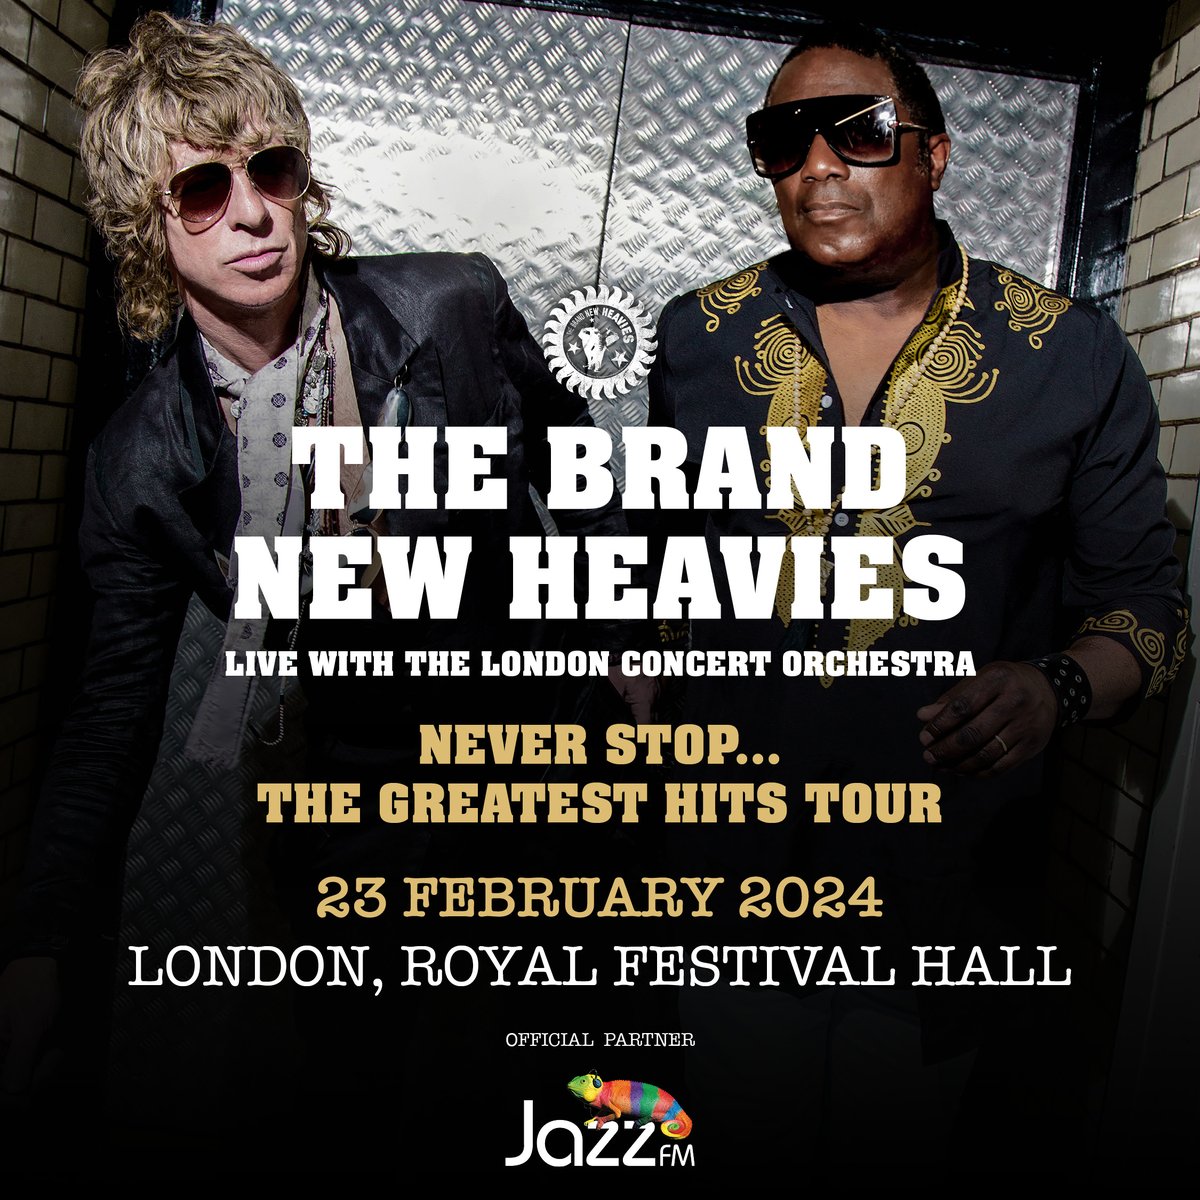 We’re excited to announce that @jazzfm are The Brand New Heavies official partner for the London Royal Festival Hall performance on Friday 23/02! DJ Simon Philips will be joining as the host of the evening. Who's coming? 🎤🎸🎶 Get your tickets here: the-brand-new-heavies.com